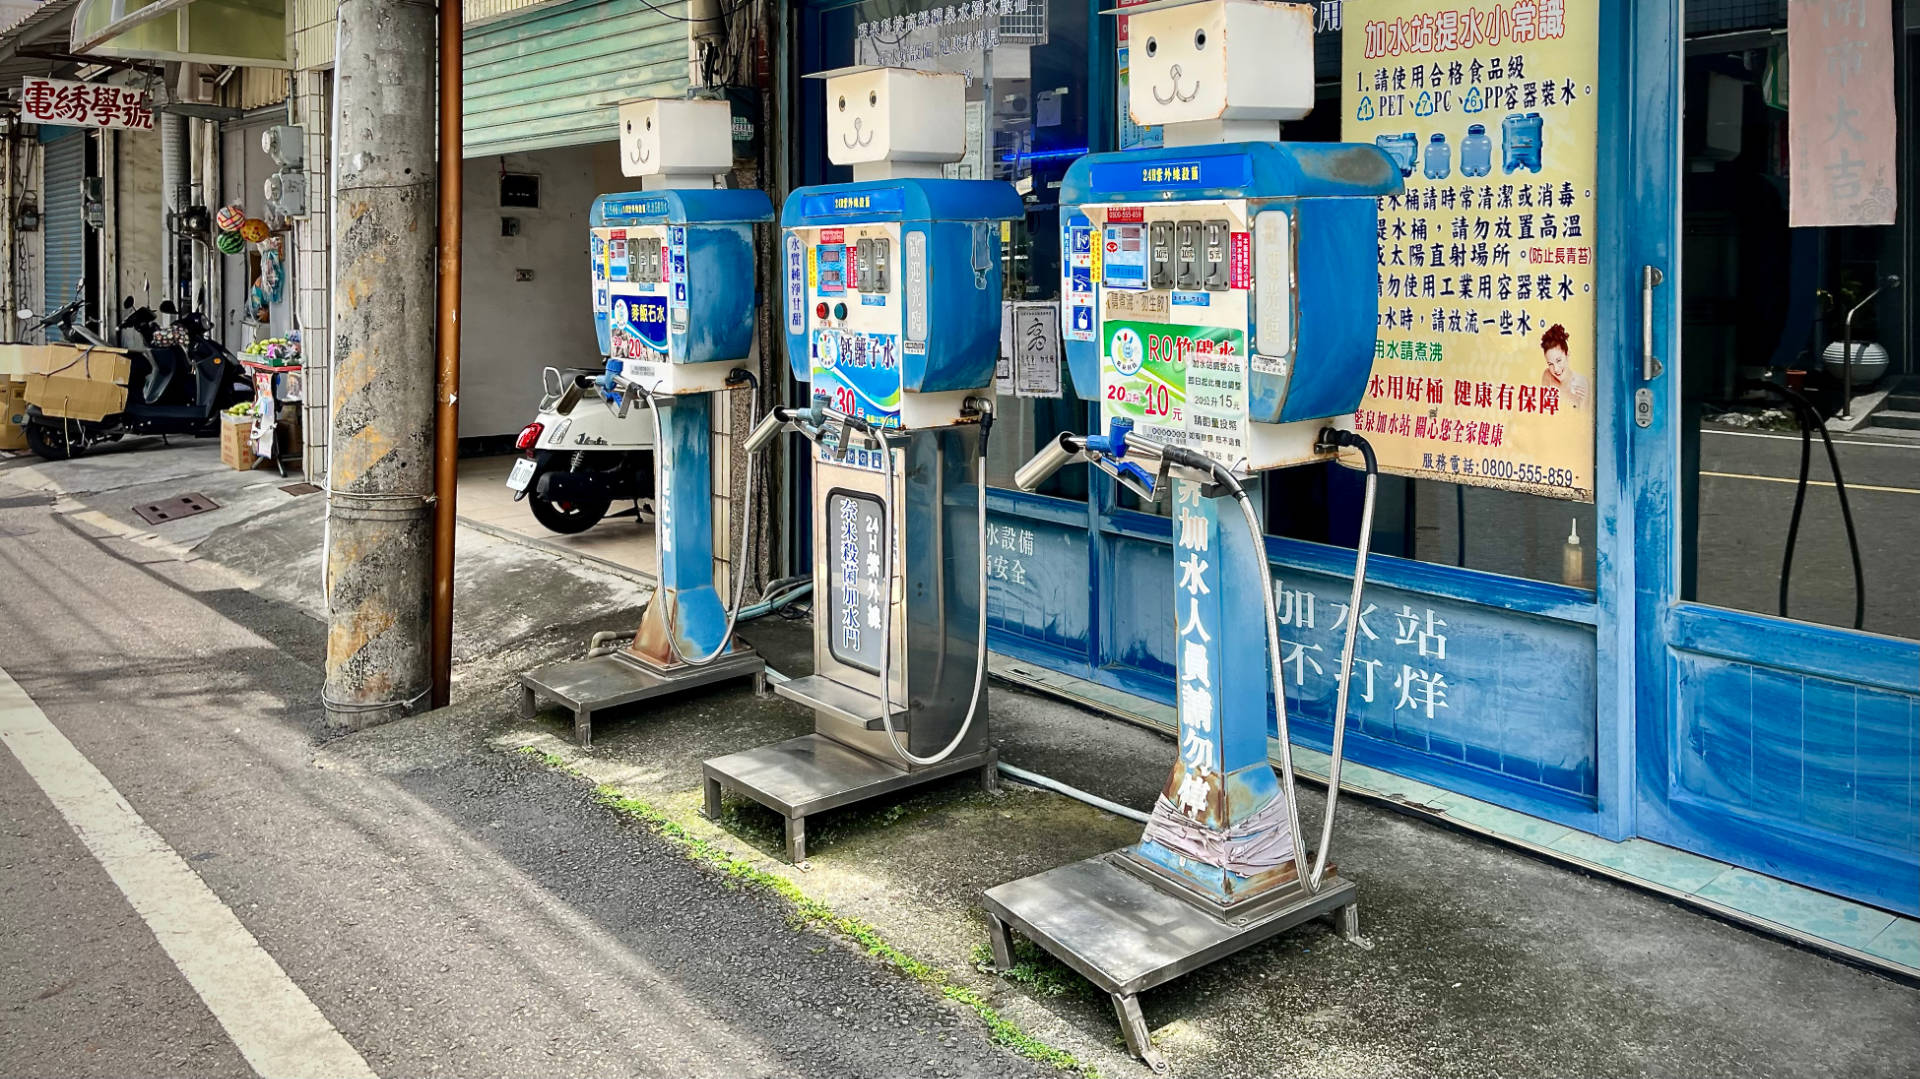 Three drinking water machines on the side of the road. Each looks a little like a petrol bowser, with a rectangular smiling face on the top. The machines are coin-operated.